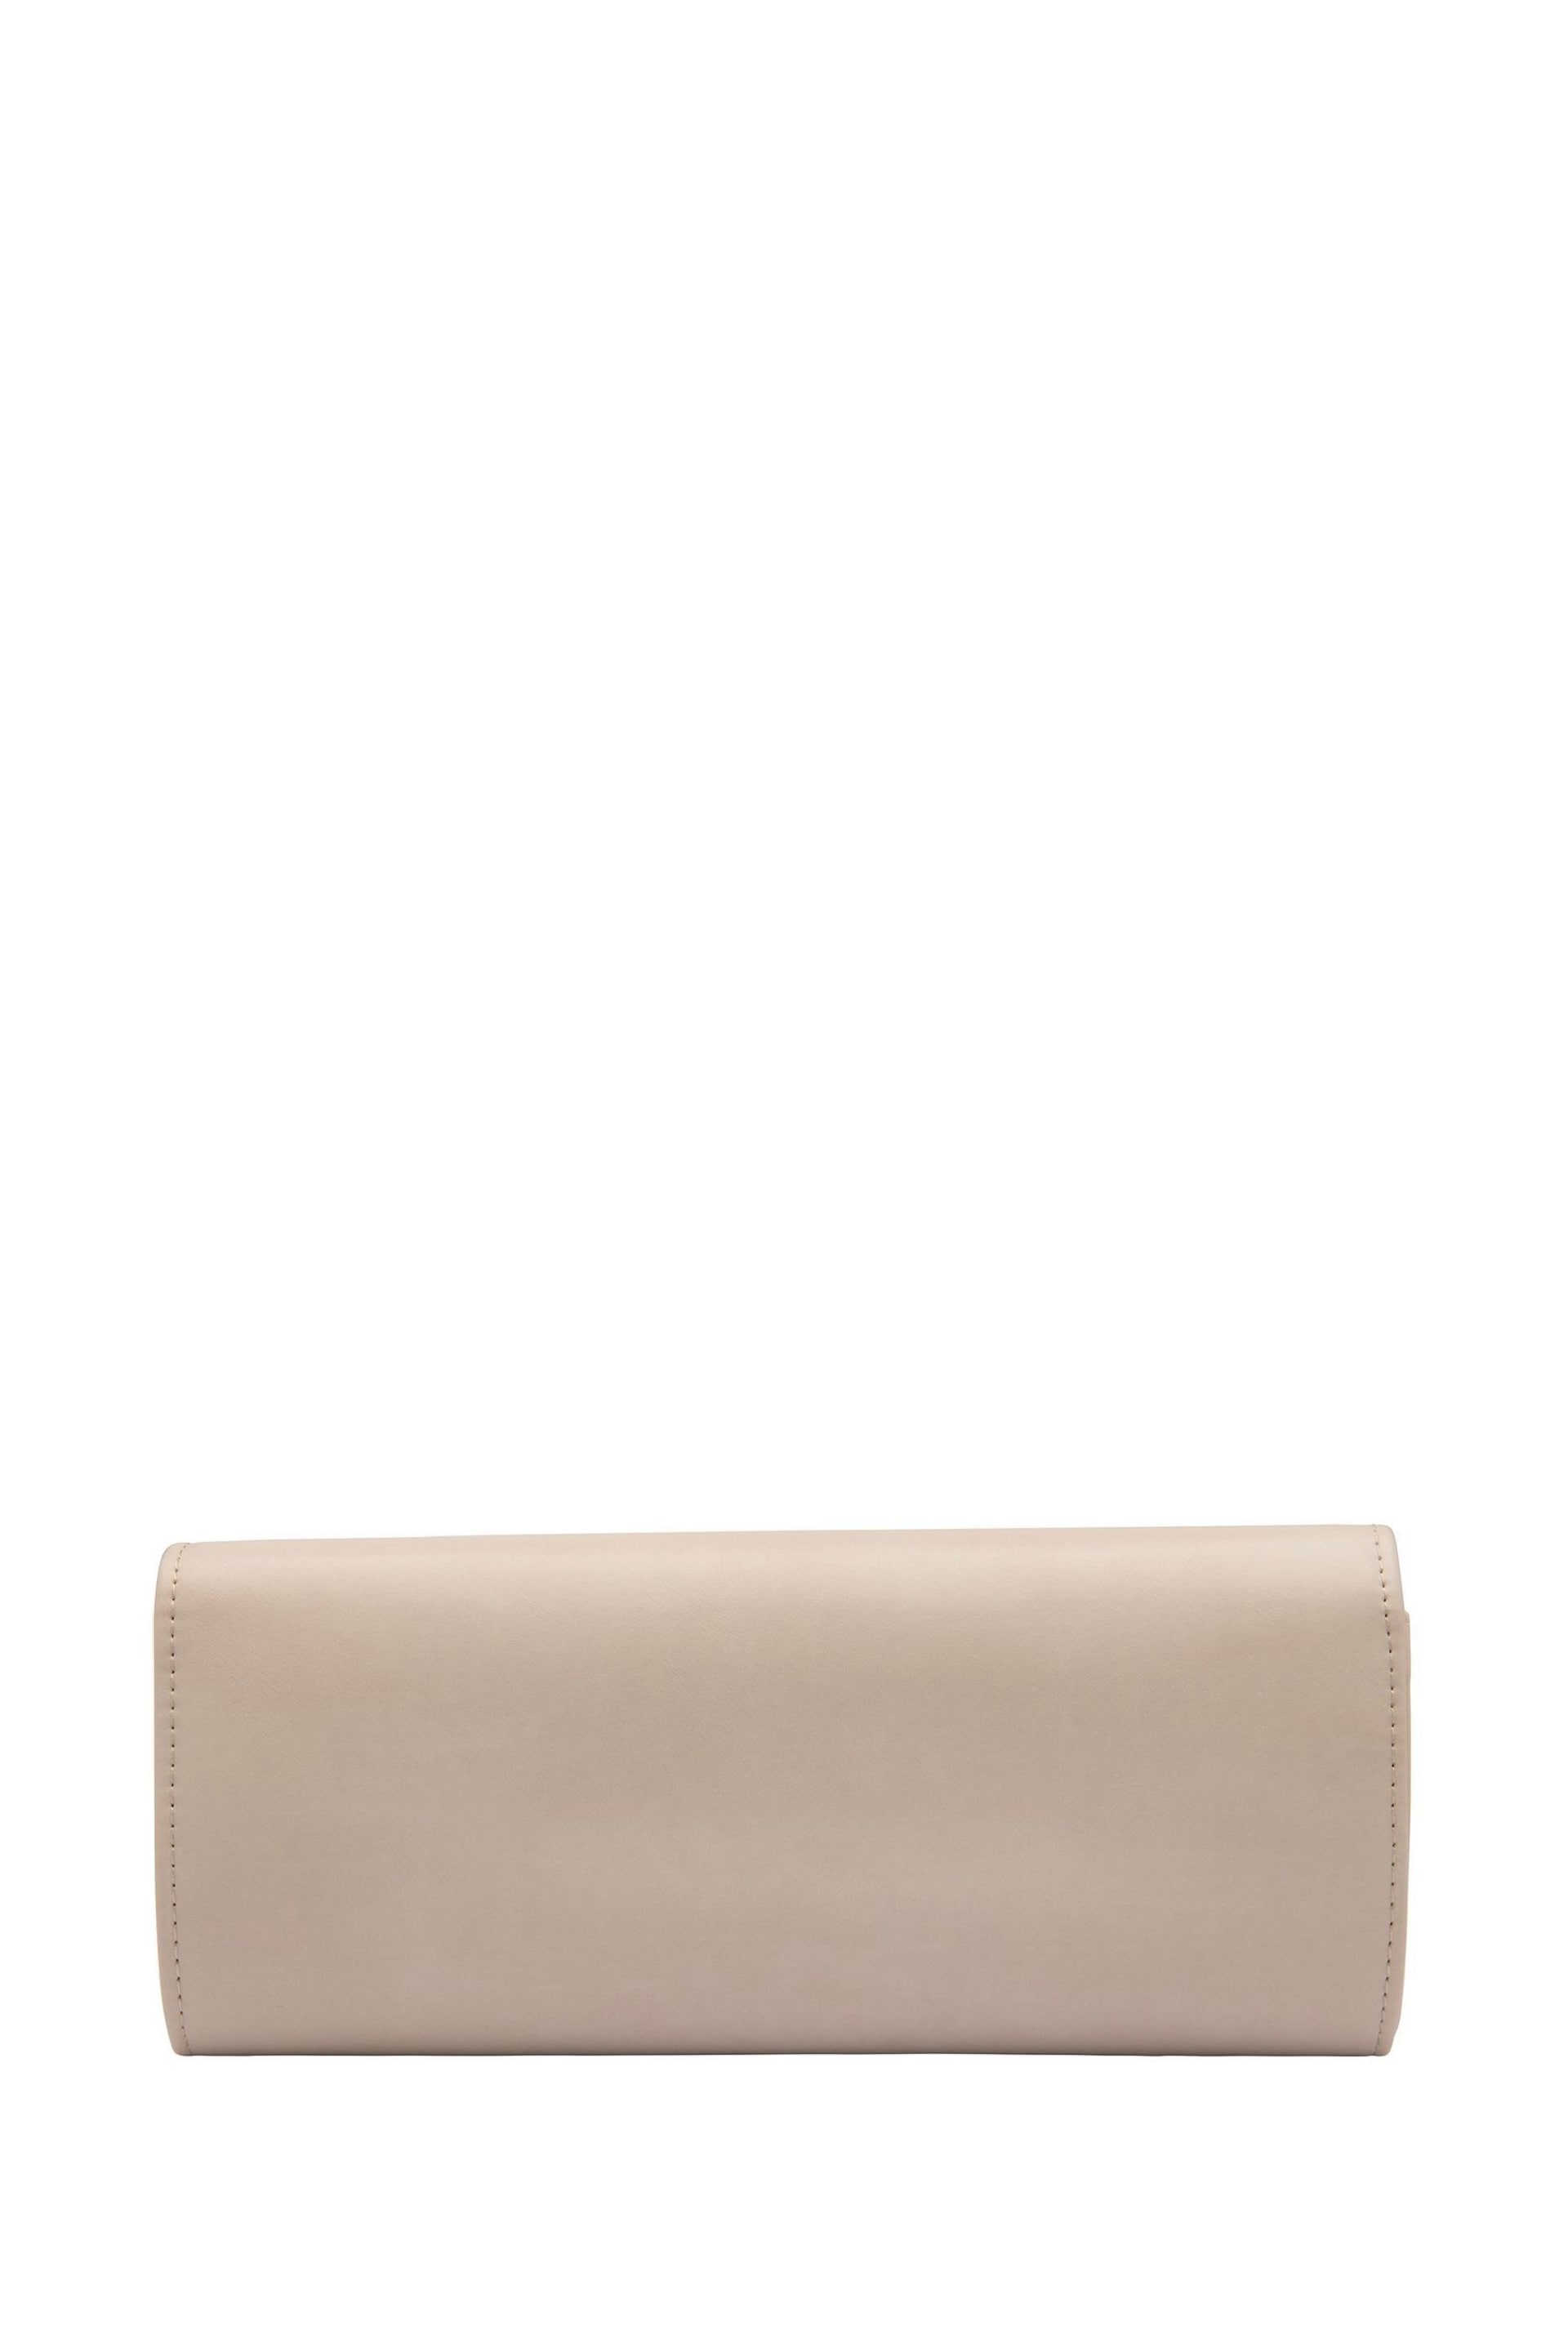 Lotus Nude Clutch Bag with Chain - Image 2 of 4